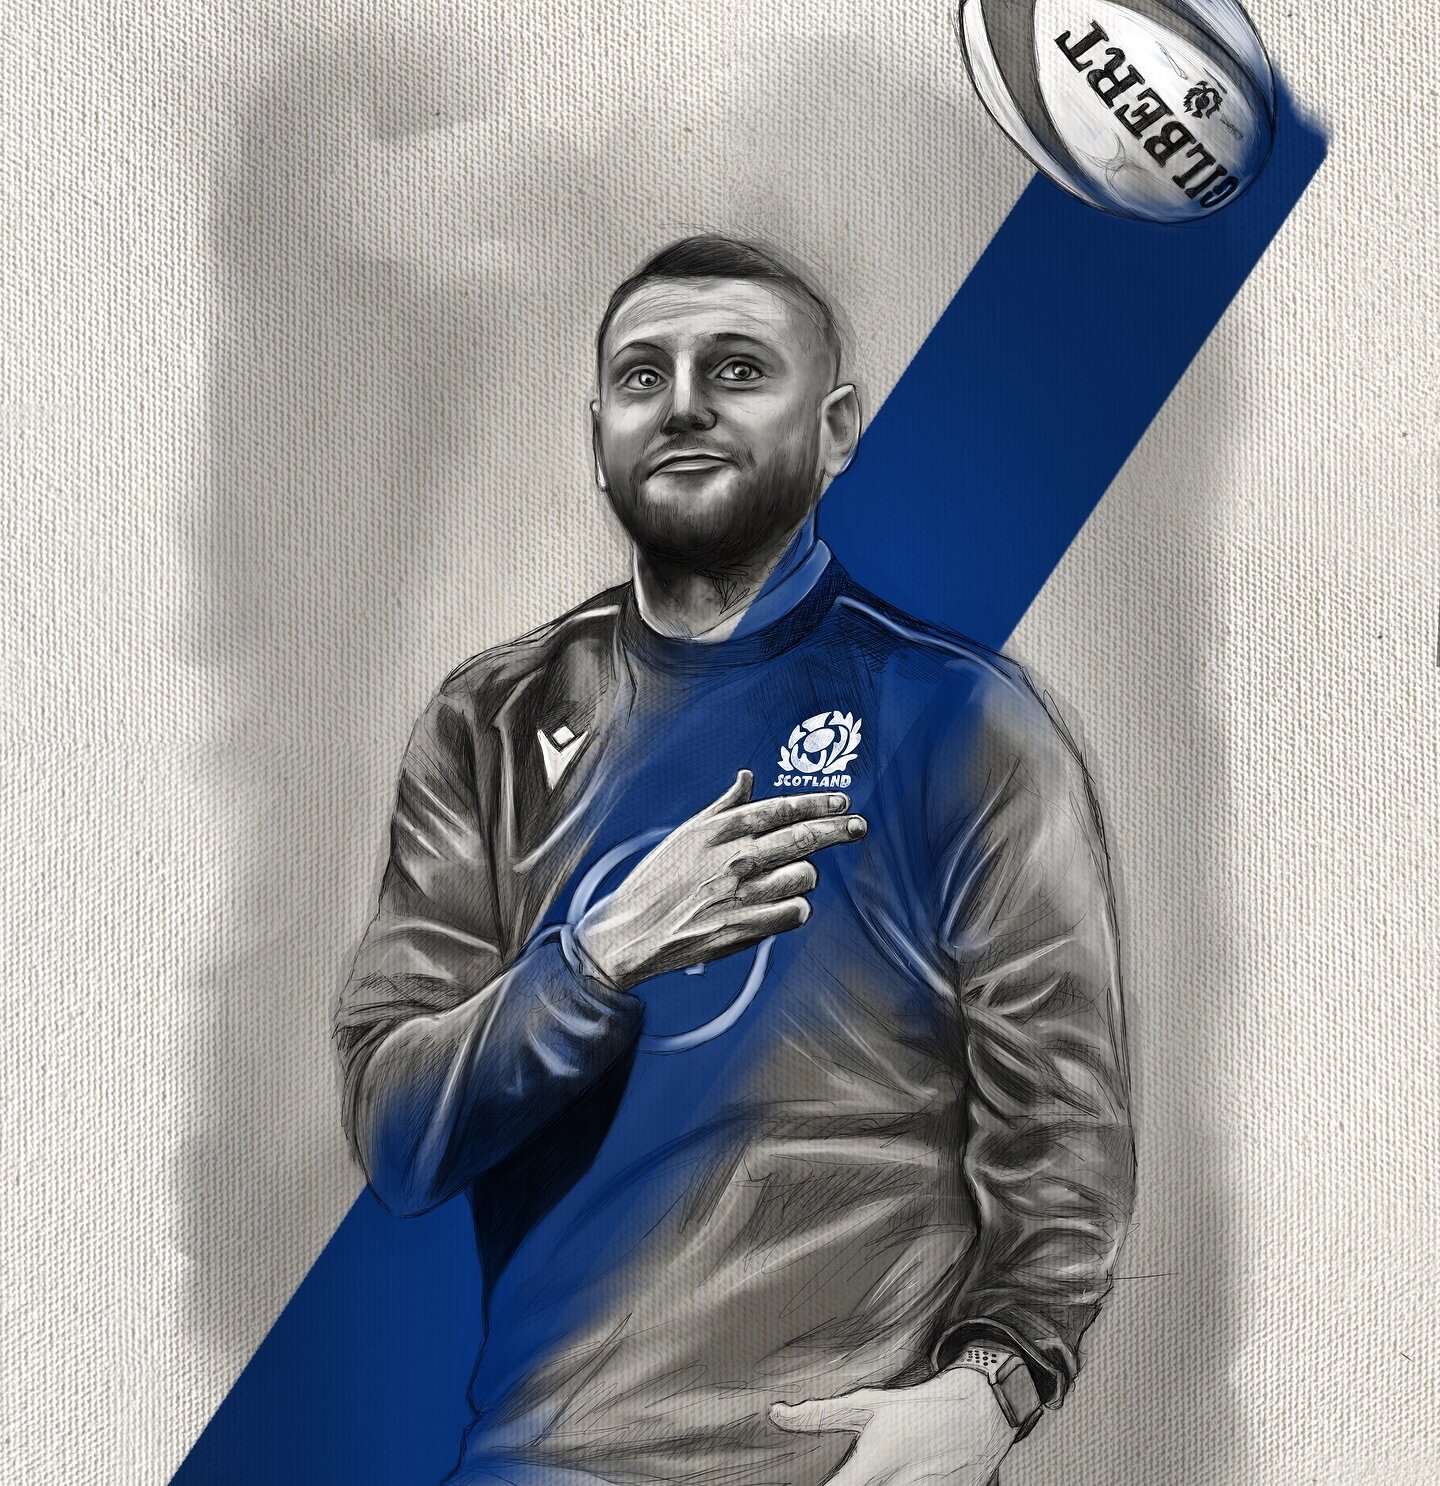 Saturday 16.45pm .. 

Are we ready? 

In @finnrussell92 we trust.. 

Wee pencil study, with ink and acrylics 

#artworld #worldrugby #sixnationsrugby #guinnesssixnations #scotland #scottishrugby #rugbyart #finnrussell #pencilportrait #inkartwork